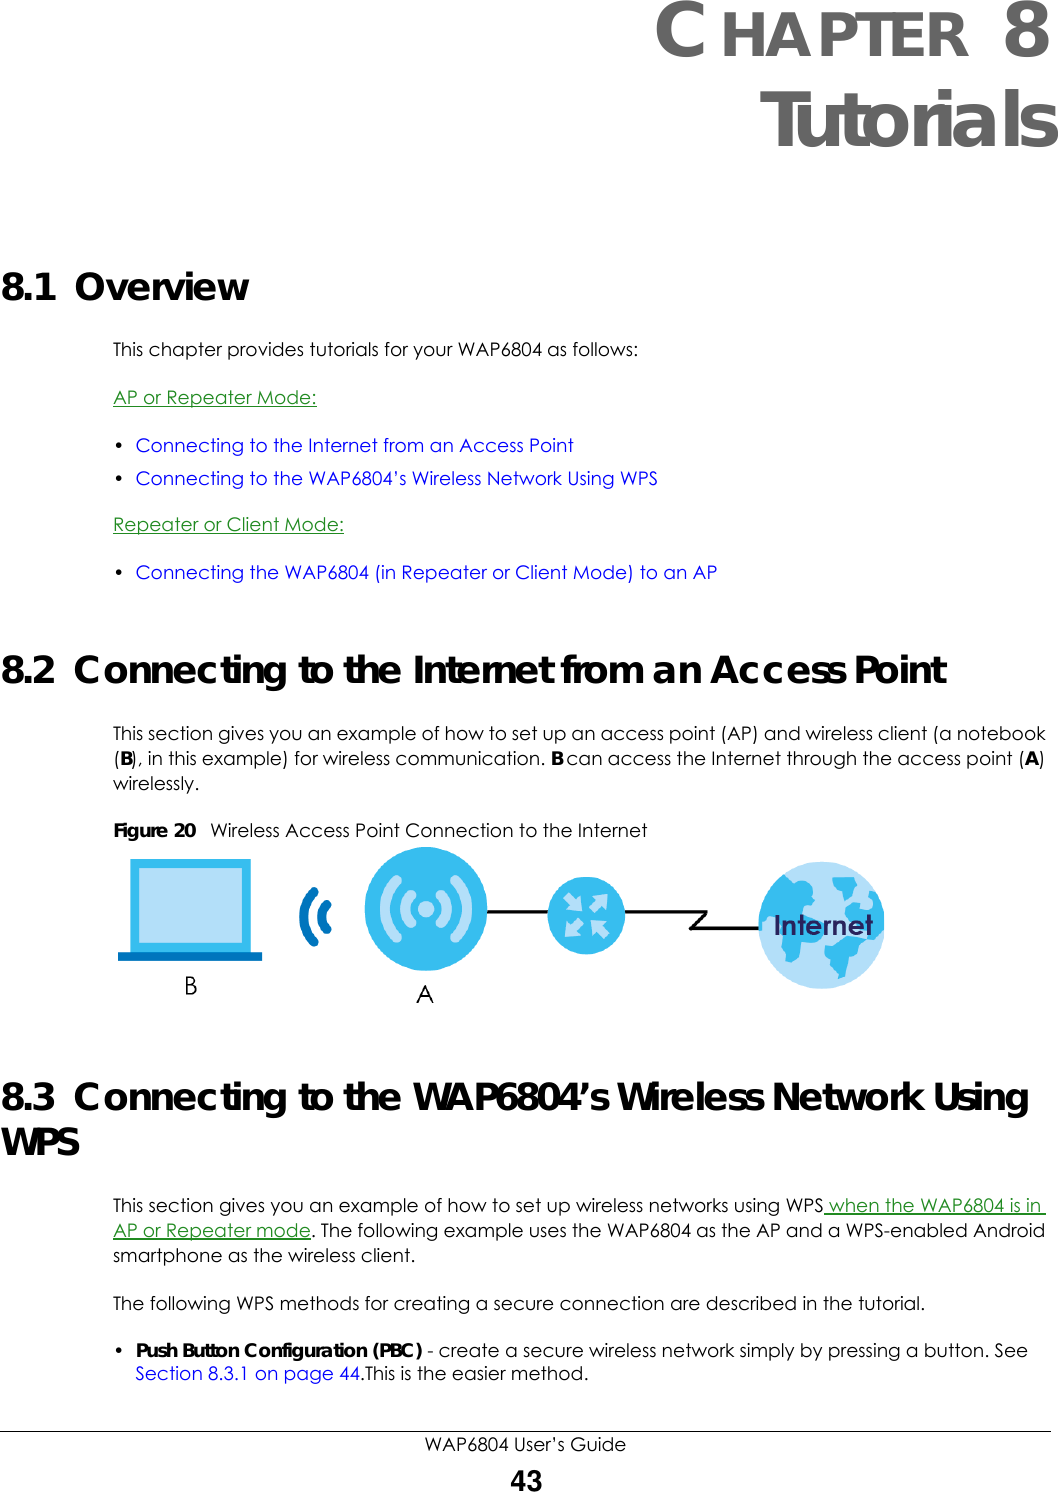 WAP6804 User’s Guide43CHAPTER 8Tutorials8.1  OverviewThis chapter provides tutorials for your WAP6804 as follows:AP or Repeater Mode:•Connecting to the Internet from an Access Point•Connecting to the WAP6804’s Wireless Network Using WPSRepeater or Client Mode:•Connecting the WAP6804 (in Repeater or Client Mode) to an AP8.2  Connecting to the Internet from an Access PointThis section gives you an example of how to set up an access point (AP) and wireless client (a notebook (B), in this example) for wireless communication. B can access the Internet through the access point (A) wirelessly.Figure 20   Wireless Access Point Connection to the Internet8.3  Connecting to the WAP6804’s Wireless Network Using WPSThis section gives you an example of how to set up wireless networks using WPS when the WAP6804 is in AP or Repeater mode. The following example uses the WAP6804 as the AP and a WPS-enabled Android smartphone as the wireless client. The following WPS methods for creating a secure connection are described in the tutorial.•Push Button Configuration (PBC) - create a secure wireless network simply by pressing a button. See Section 8.3.1 on page 44.This is the easier method.